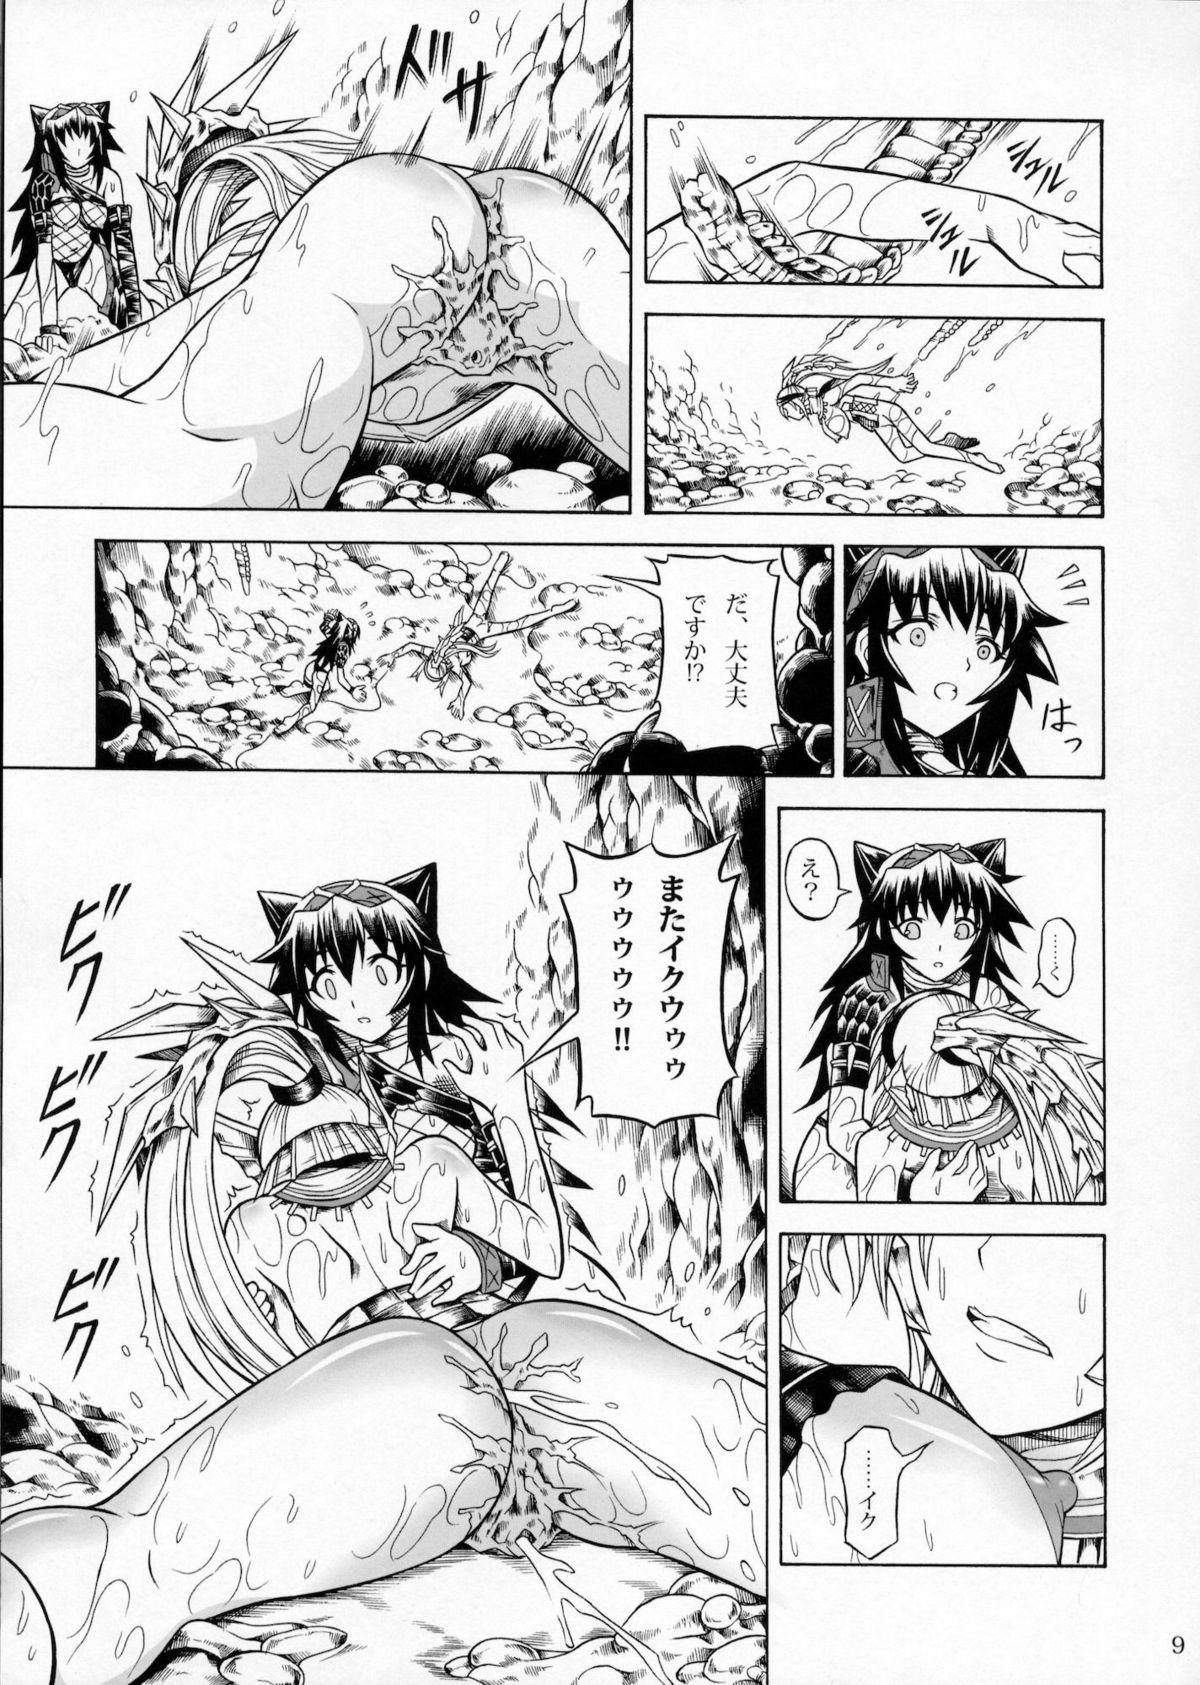 Family Porn Solo Hunter no Seitai 2 The second part - Monster hunter Gay Sex - Page 8